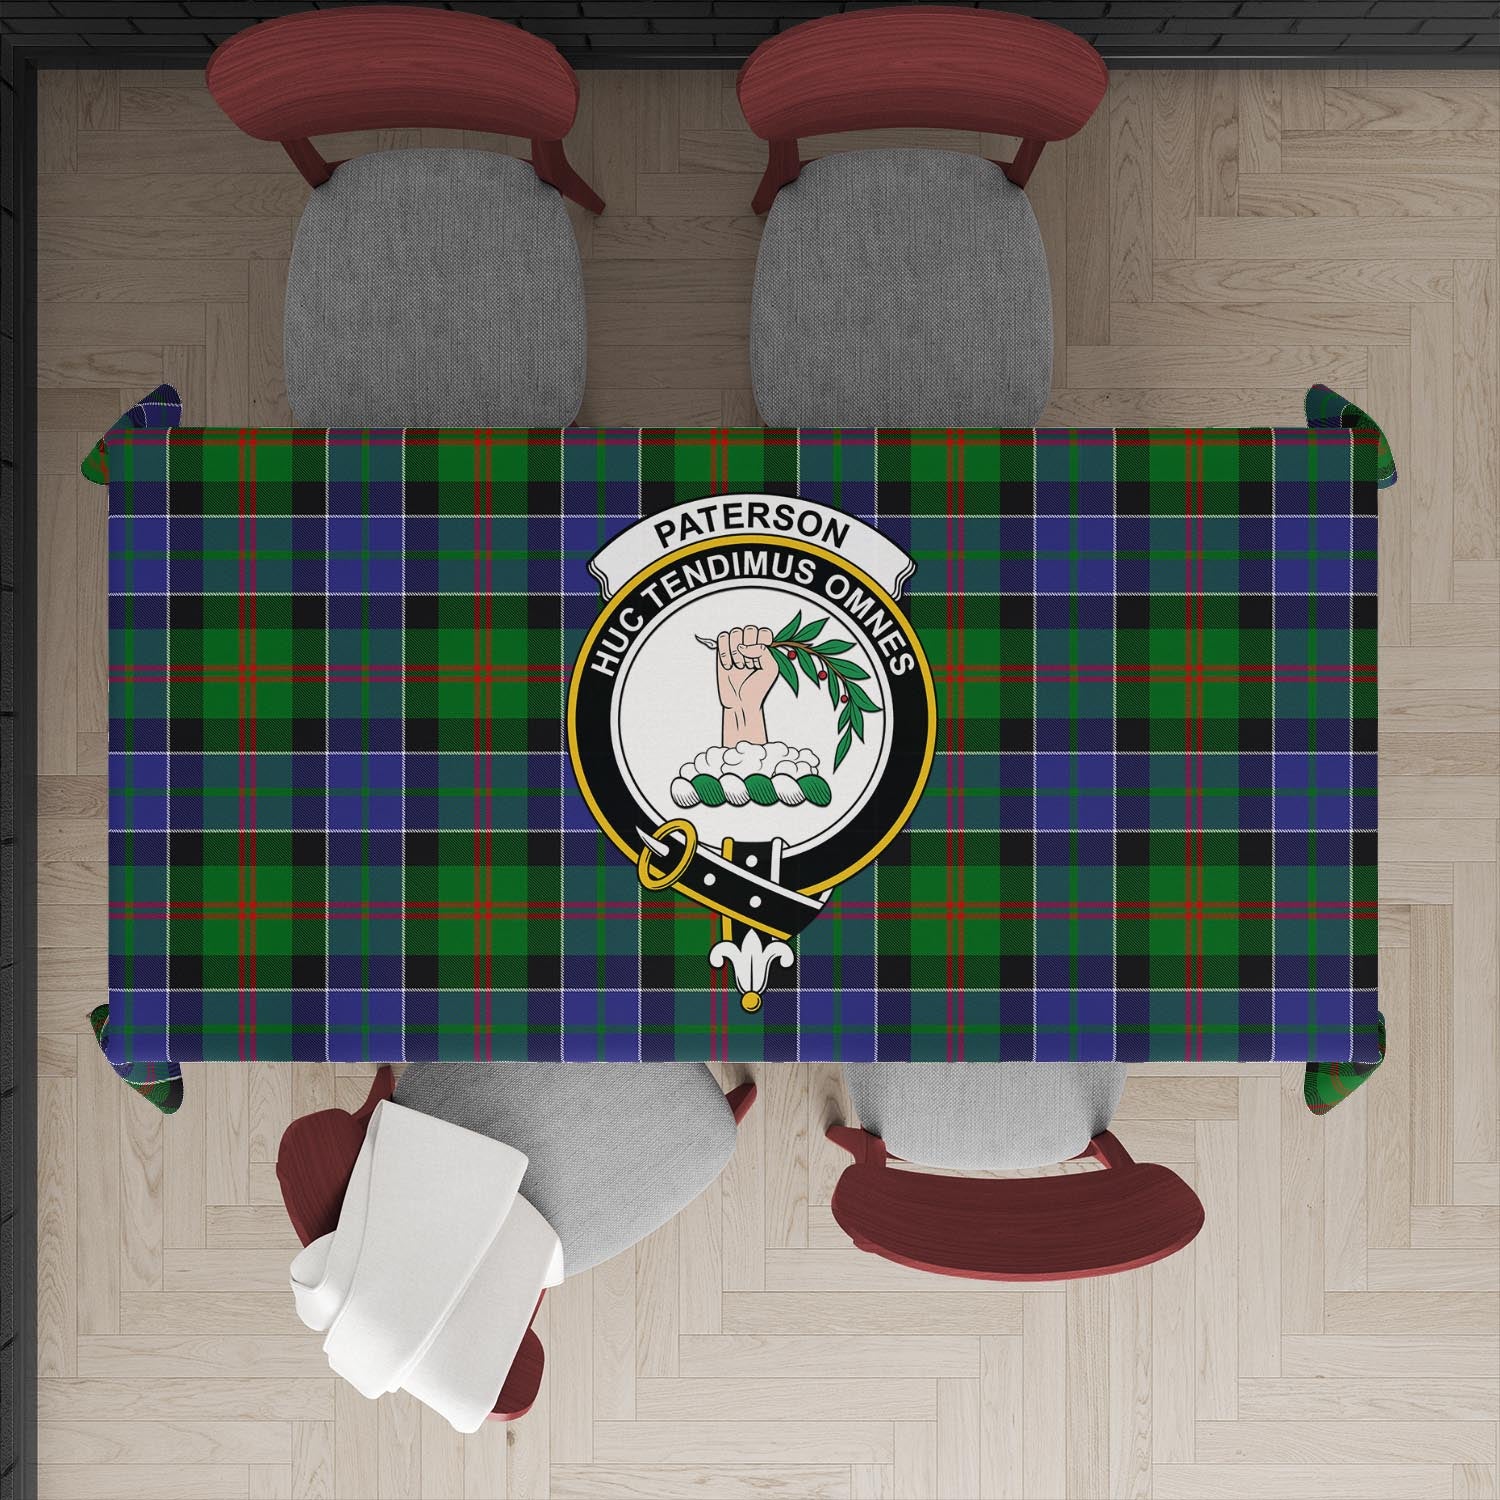 paterson-tatan-tablecloth-with-family-crest